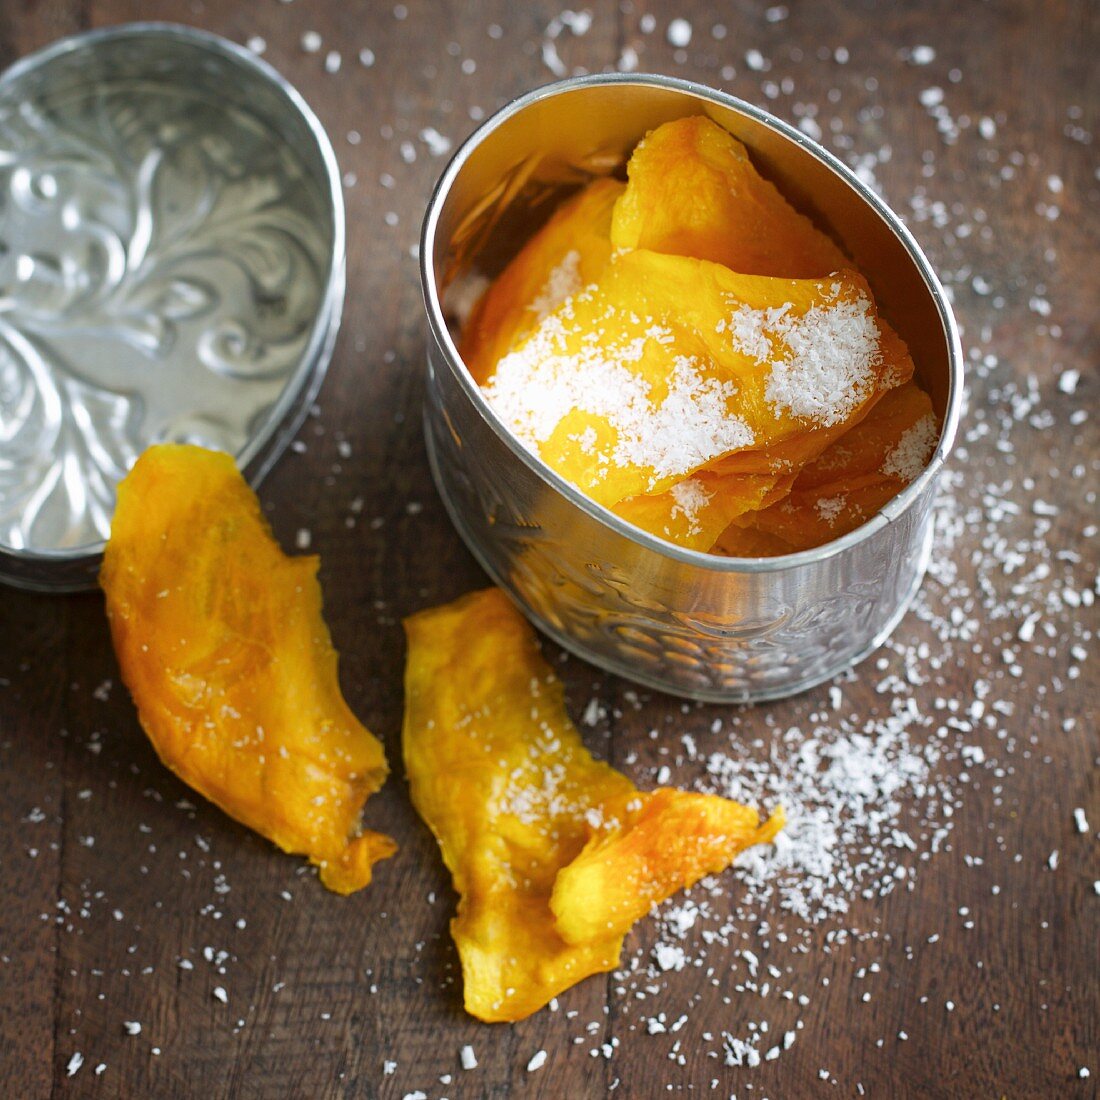 Home-dried mango with desiccated coconut